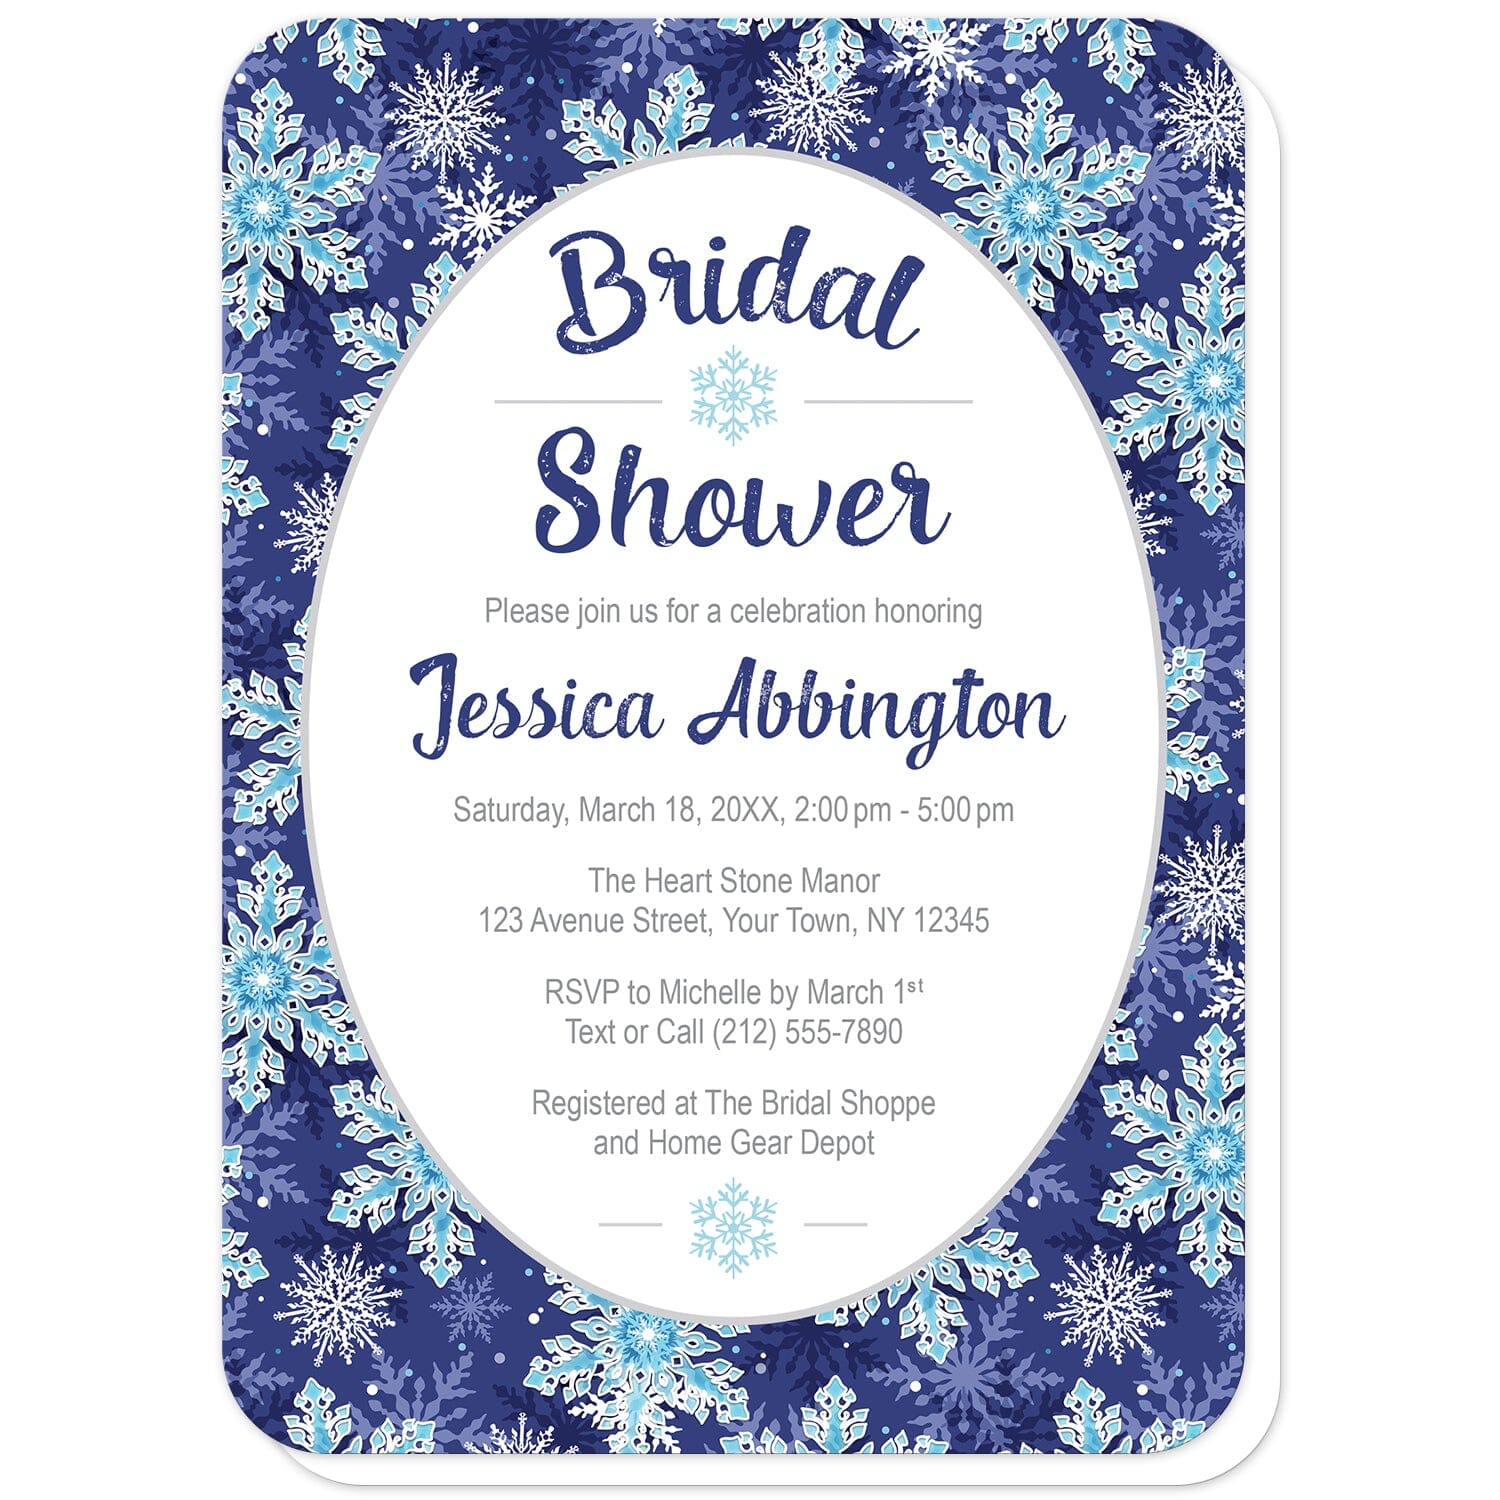 Navy Blue Snowflake Bridal Shower Invitations (rounded corners) at Artistically Invited. Beautifully ornate navy blue snowflake bridal shower invitations designed with your personalized celebration details custom printed in navy blue and gray in a white oval frame design over a navy blue, aqua, and white snowflake pattern background.